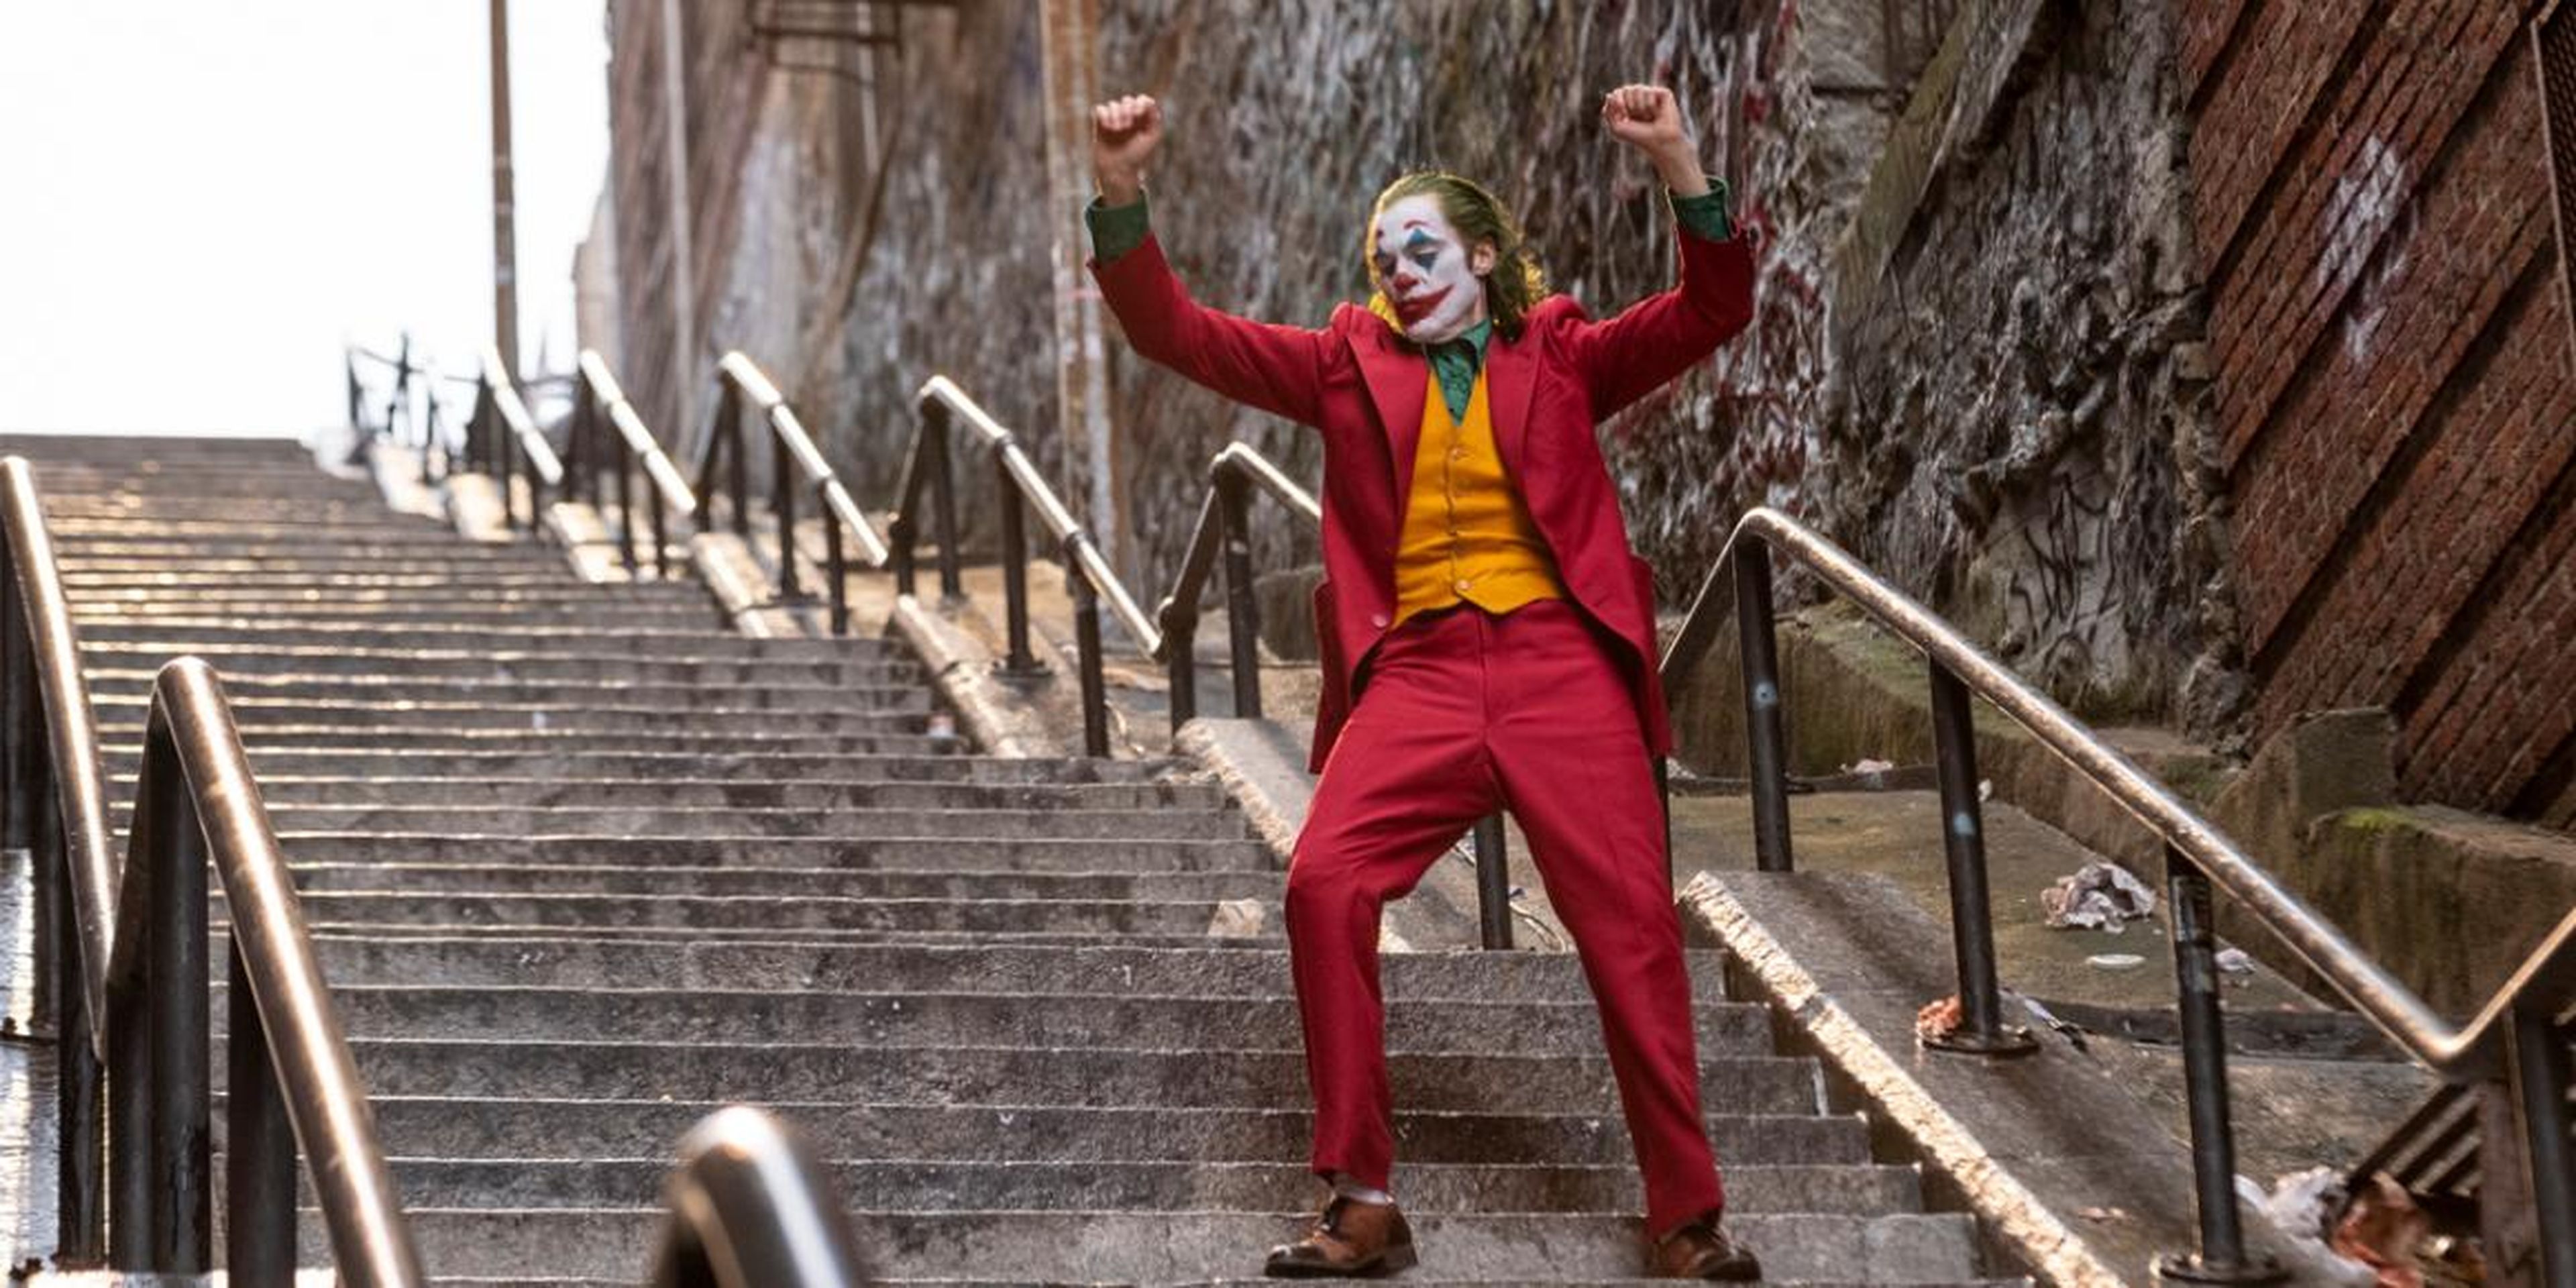 A stairway in the Bronx has become a hot new tourist destination thanks to being featured in the 2019 film "Joker."